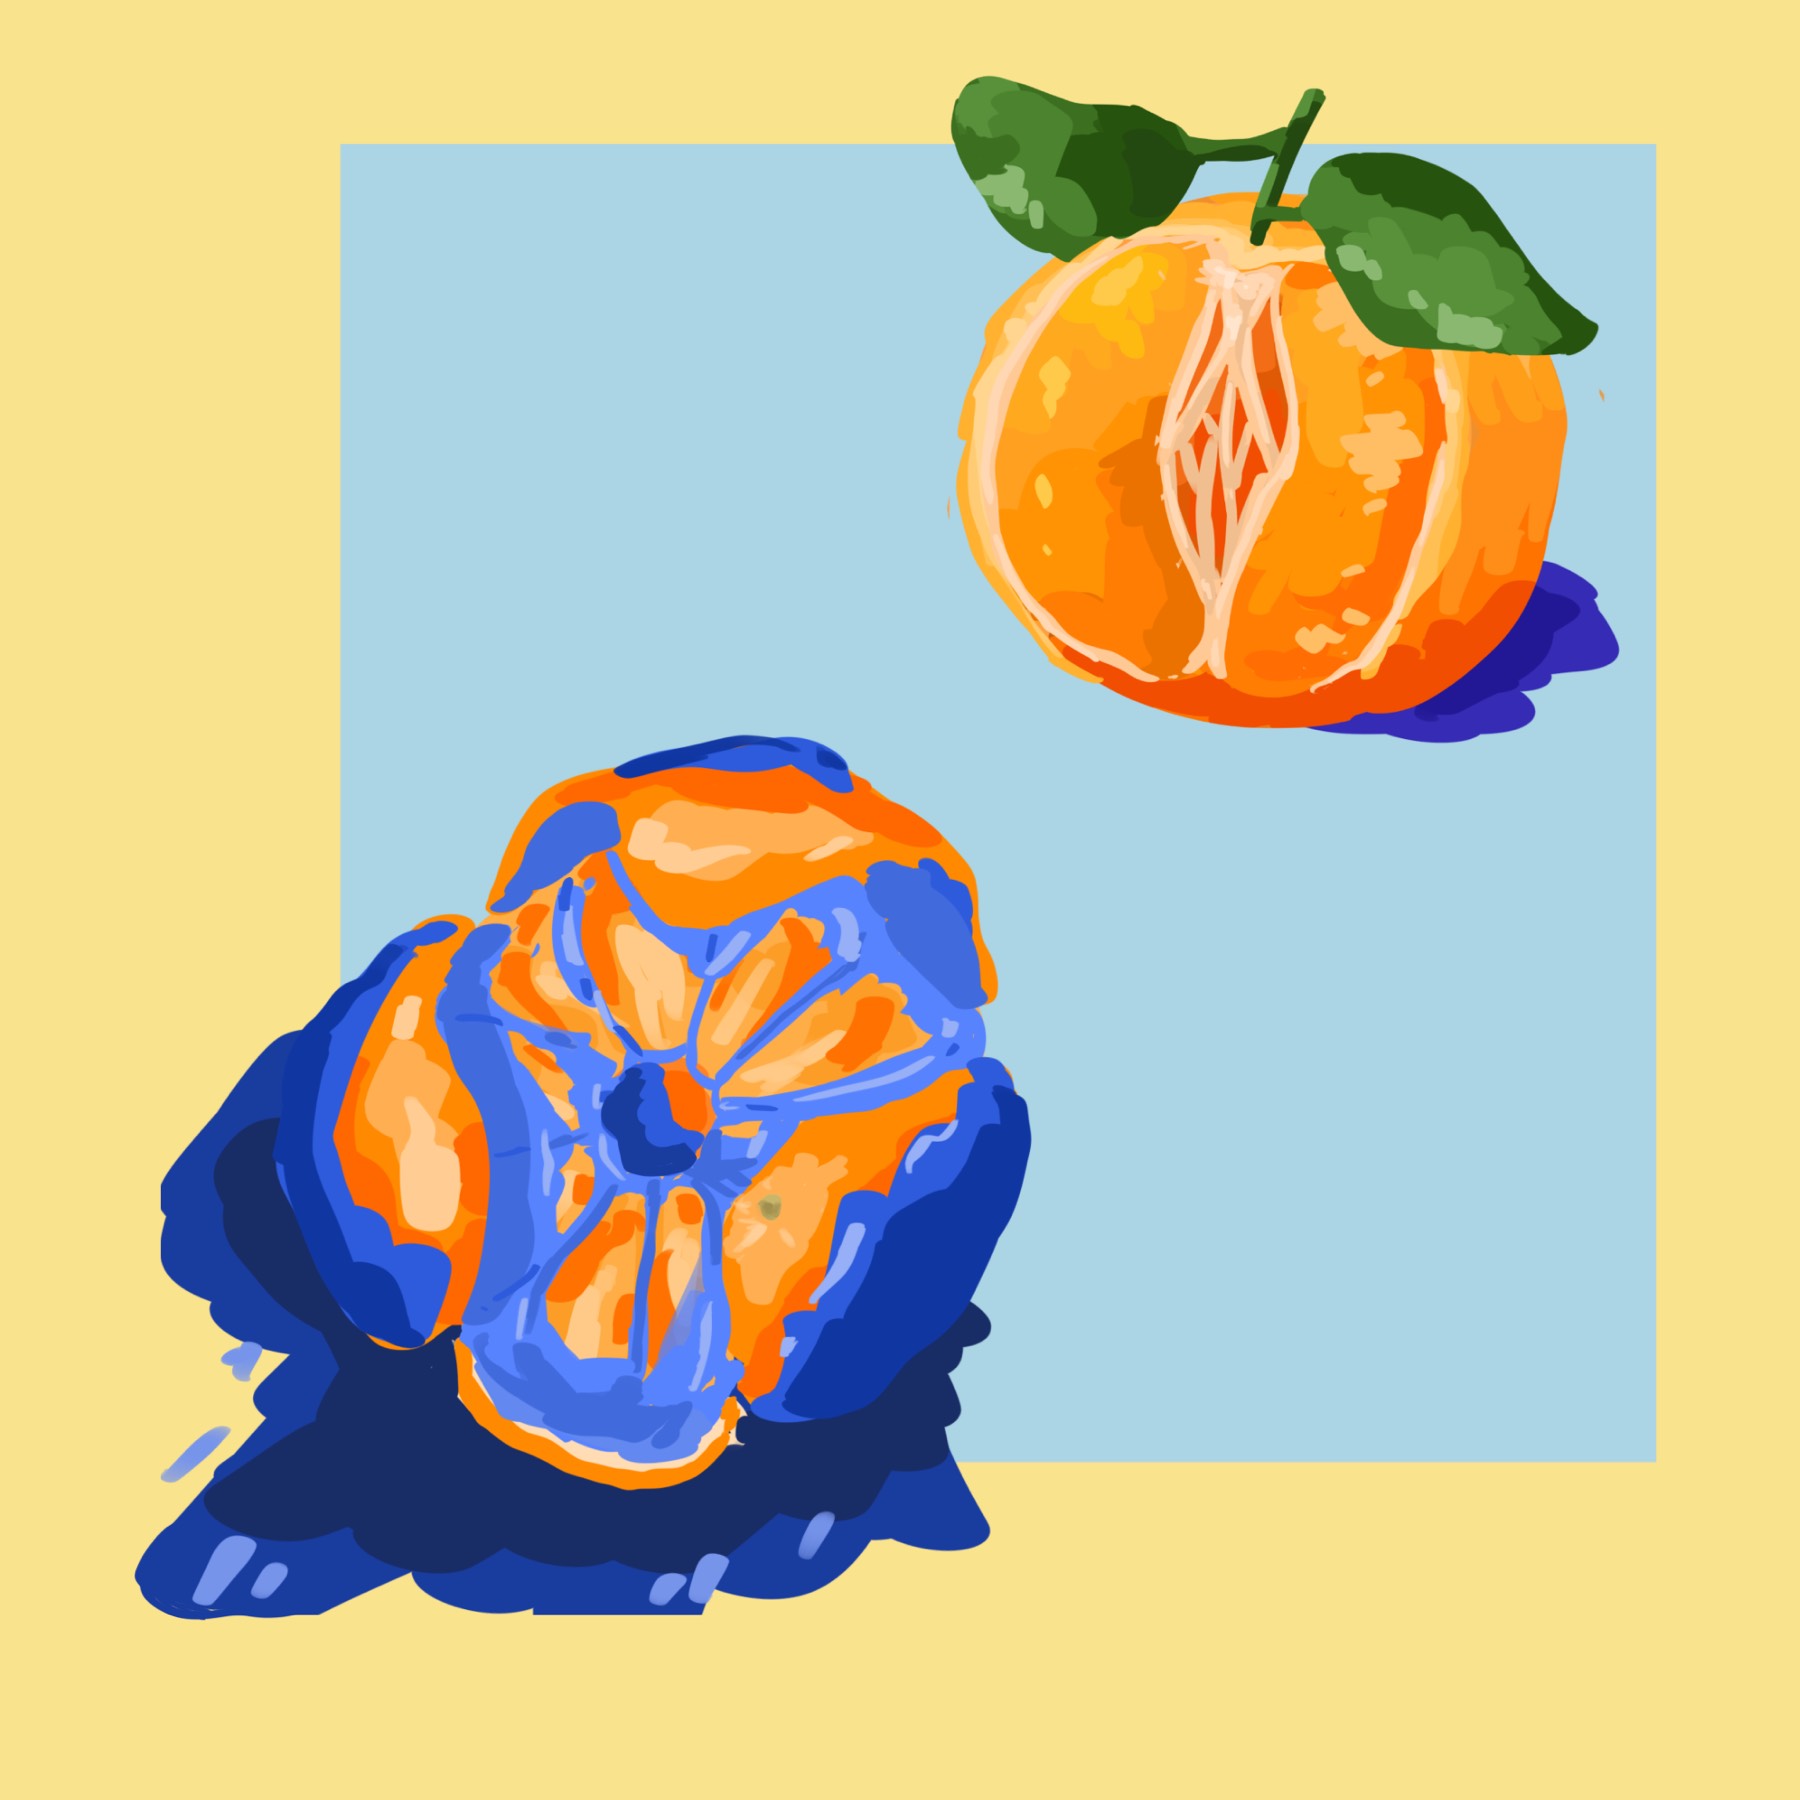 Two clementines